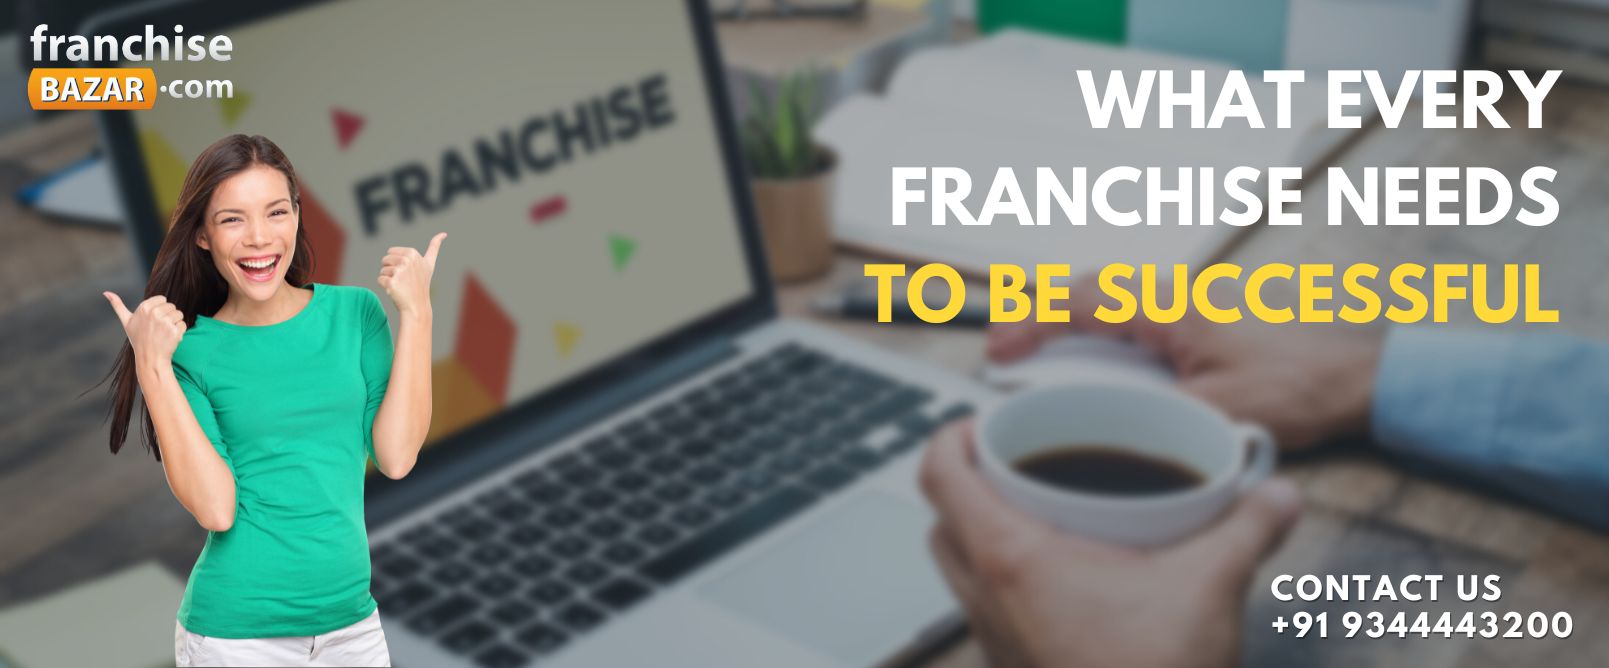 Franchise opportunity in India